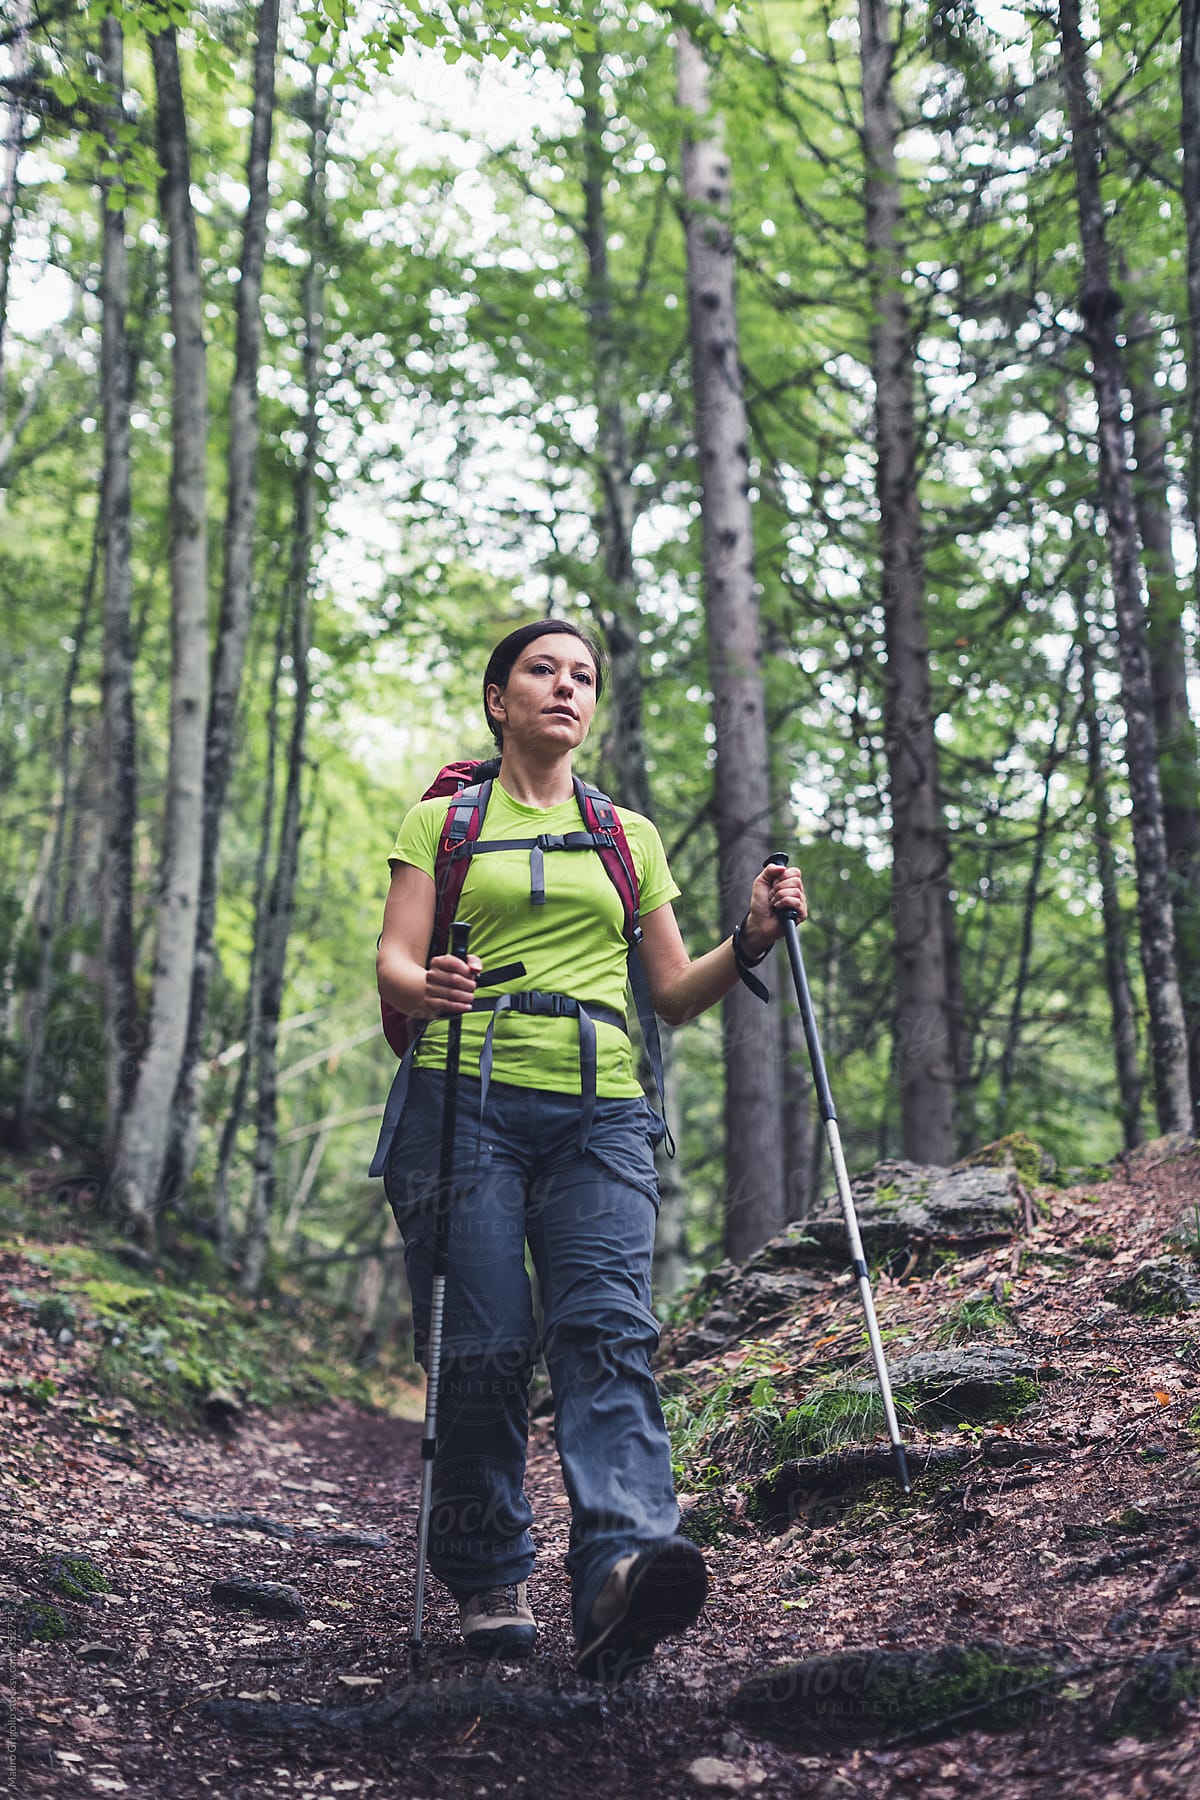 A female mountaineer coming down the trail